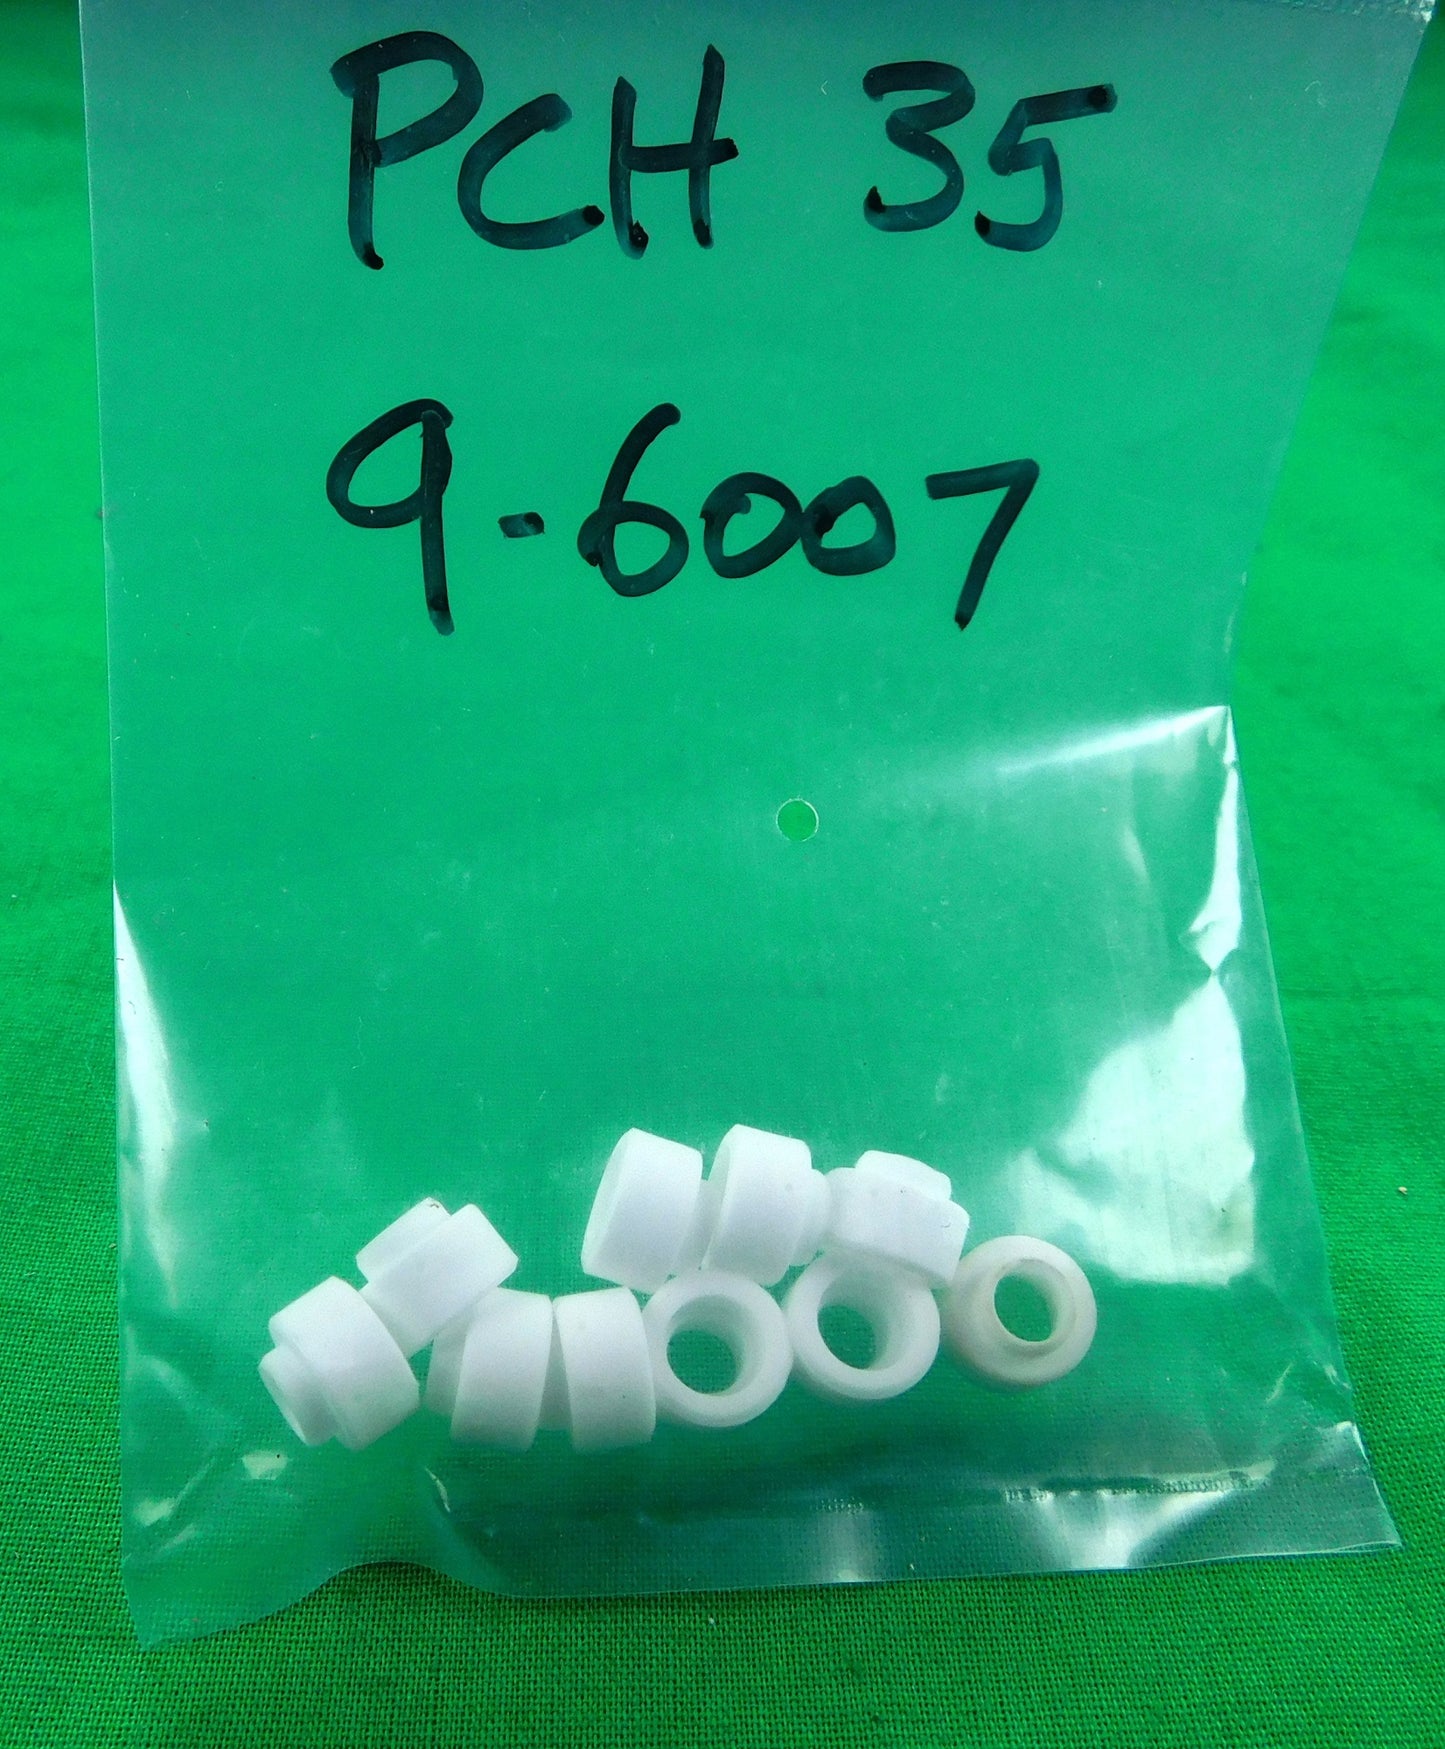 PCH 35 Swirl Rings 9-6007 (Qty10) Plasma Cutter Spares